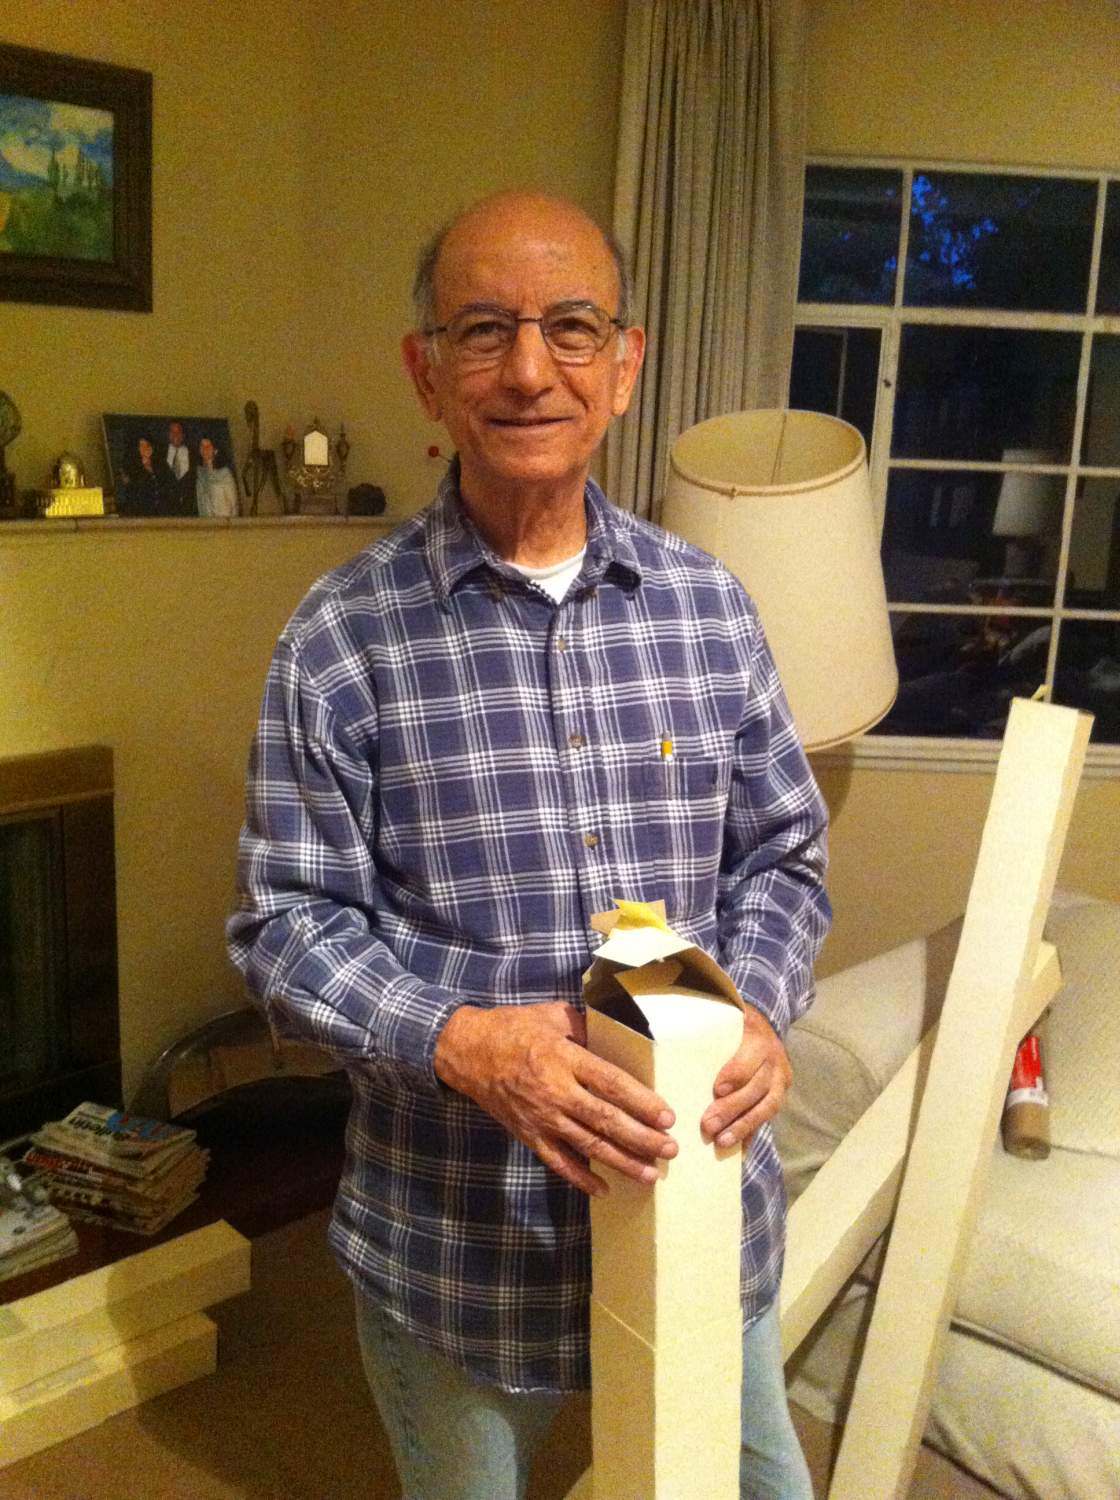 Besim Hakim holding a roll of his drawings and maps from the 1970s, in Albuquerque, New Mexico, October 2017